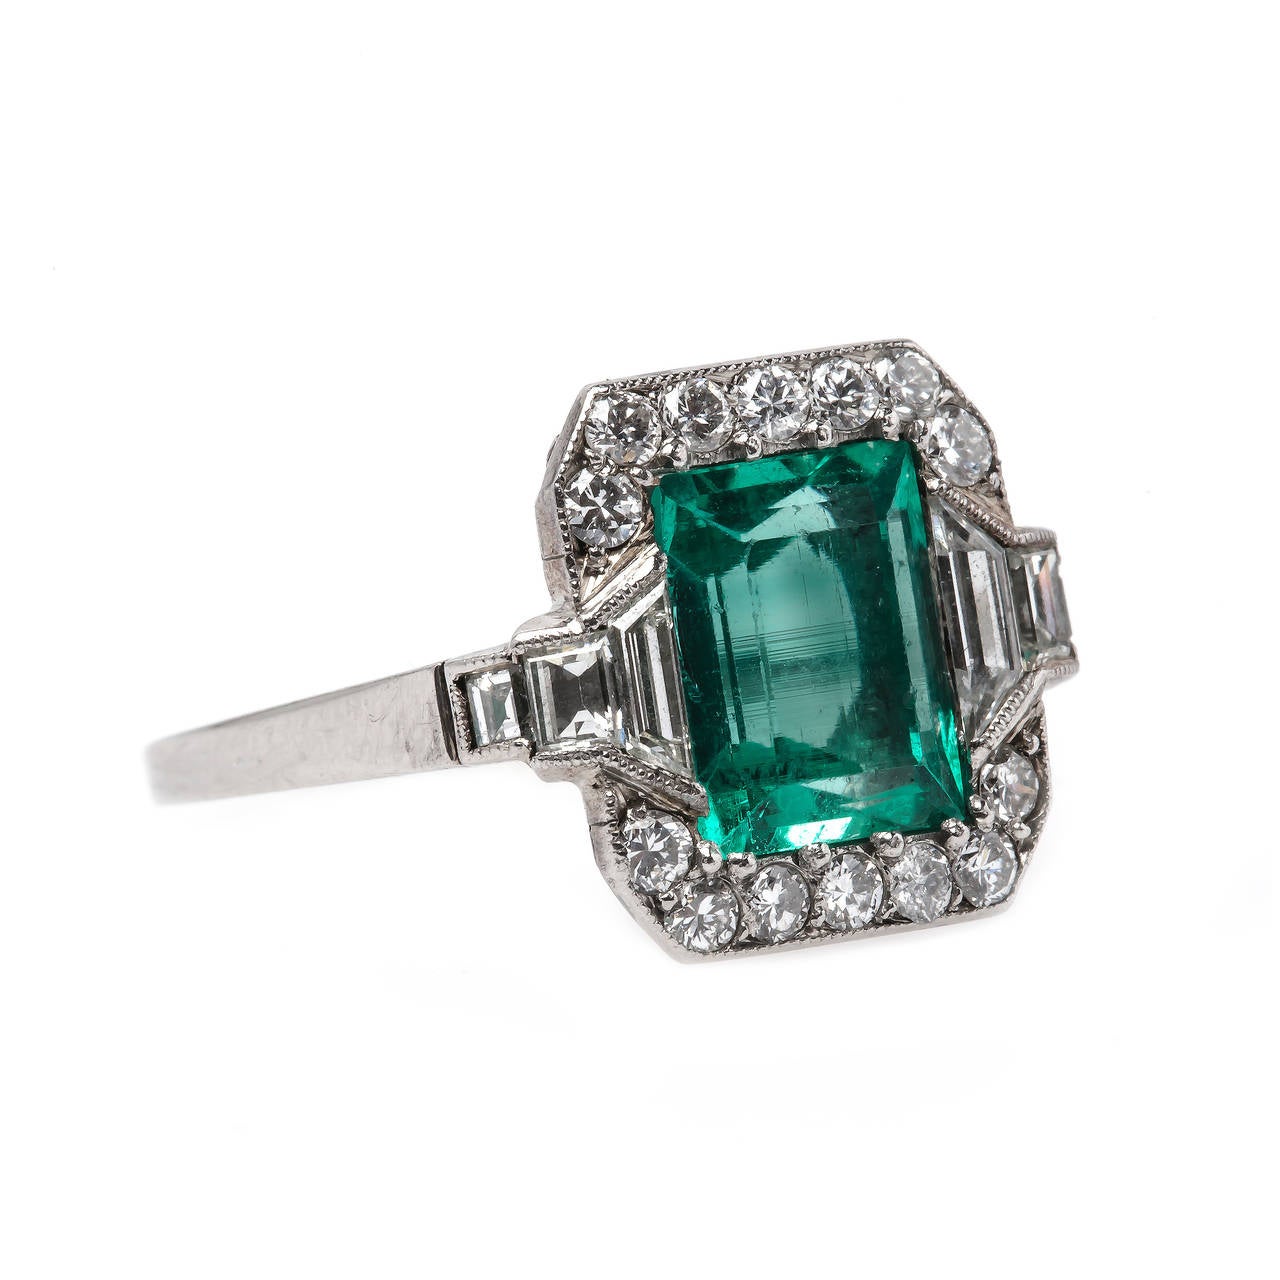 Autry Trail is a timeless authentic Art Deco (circa 1925) platinum ring centering a prong set Rectangular Step cut natural Colombian emerald gauged at 1.85 carat accompanied with a Guild Laboratories Certificate. This perfectly saturated green color